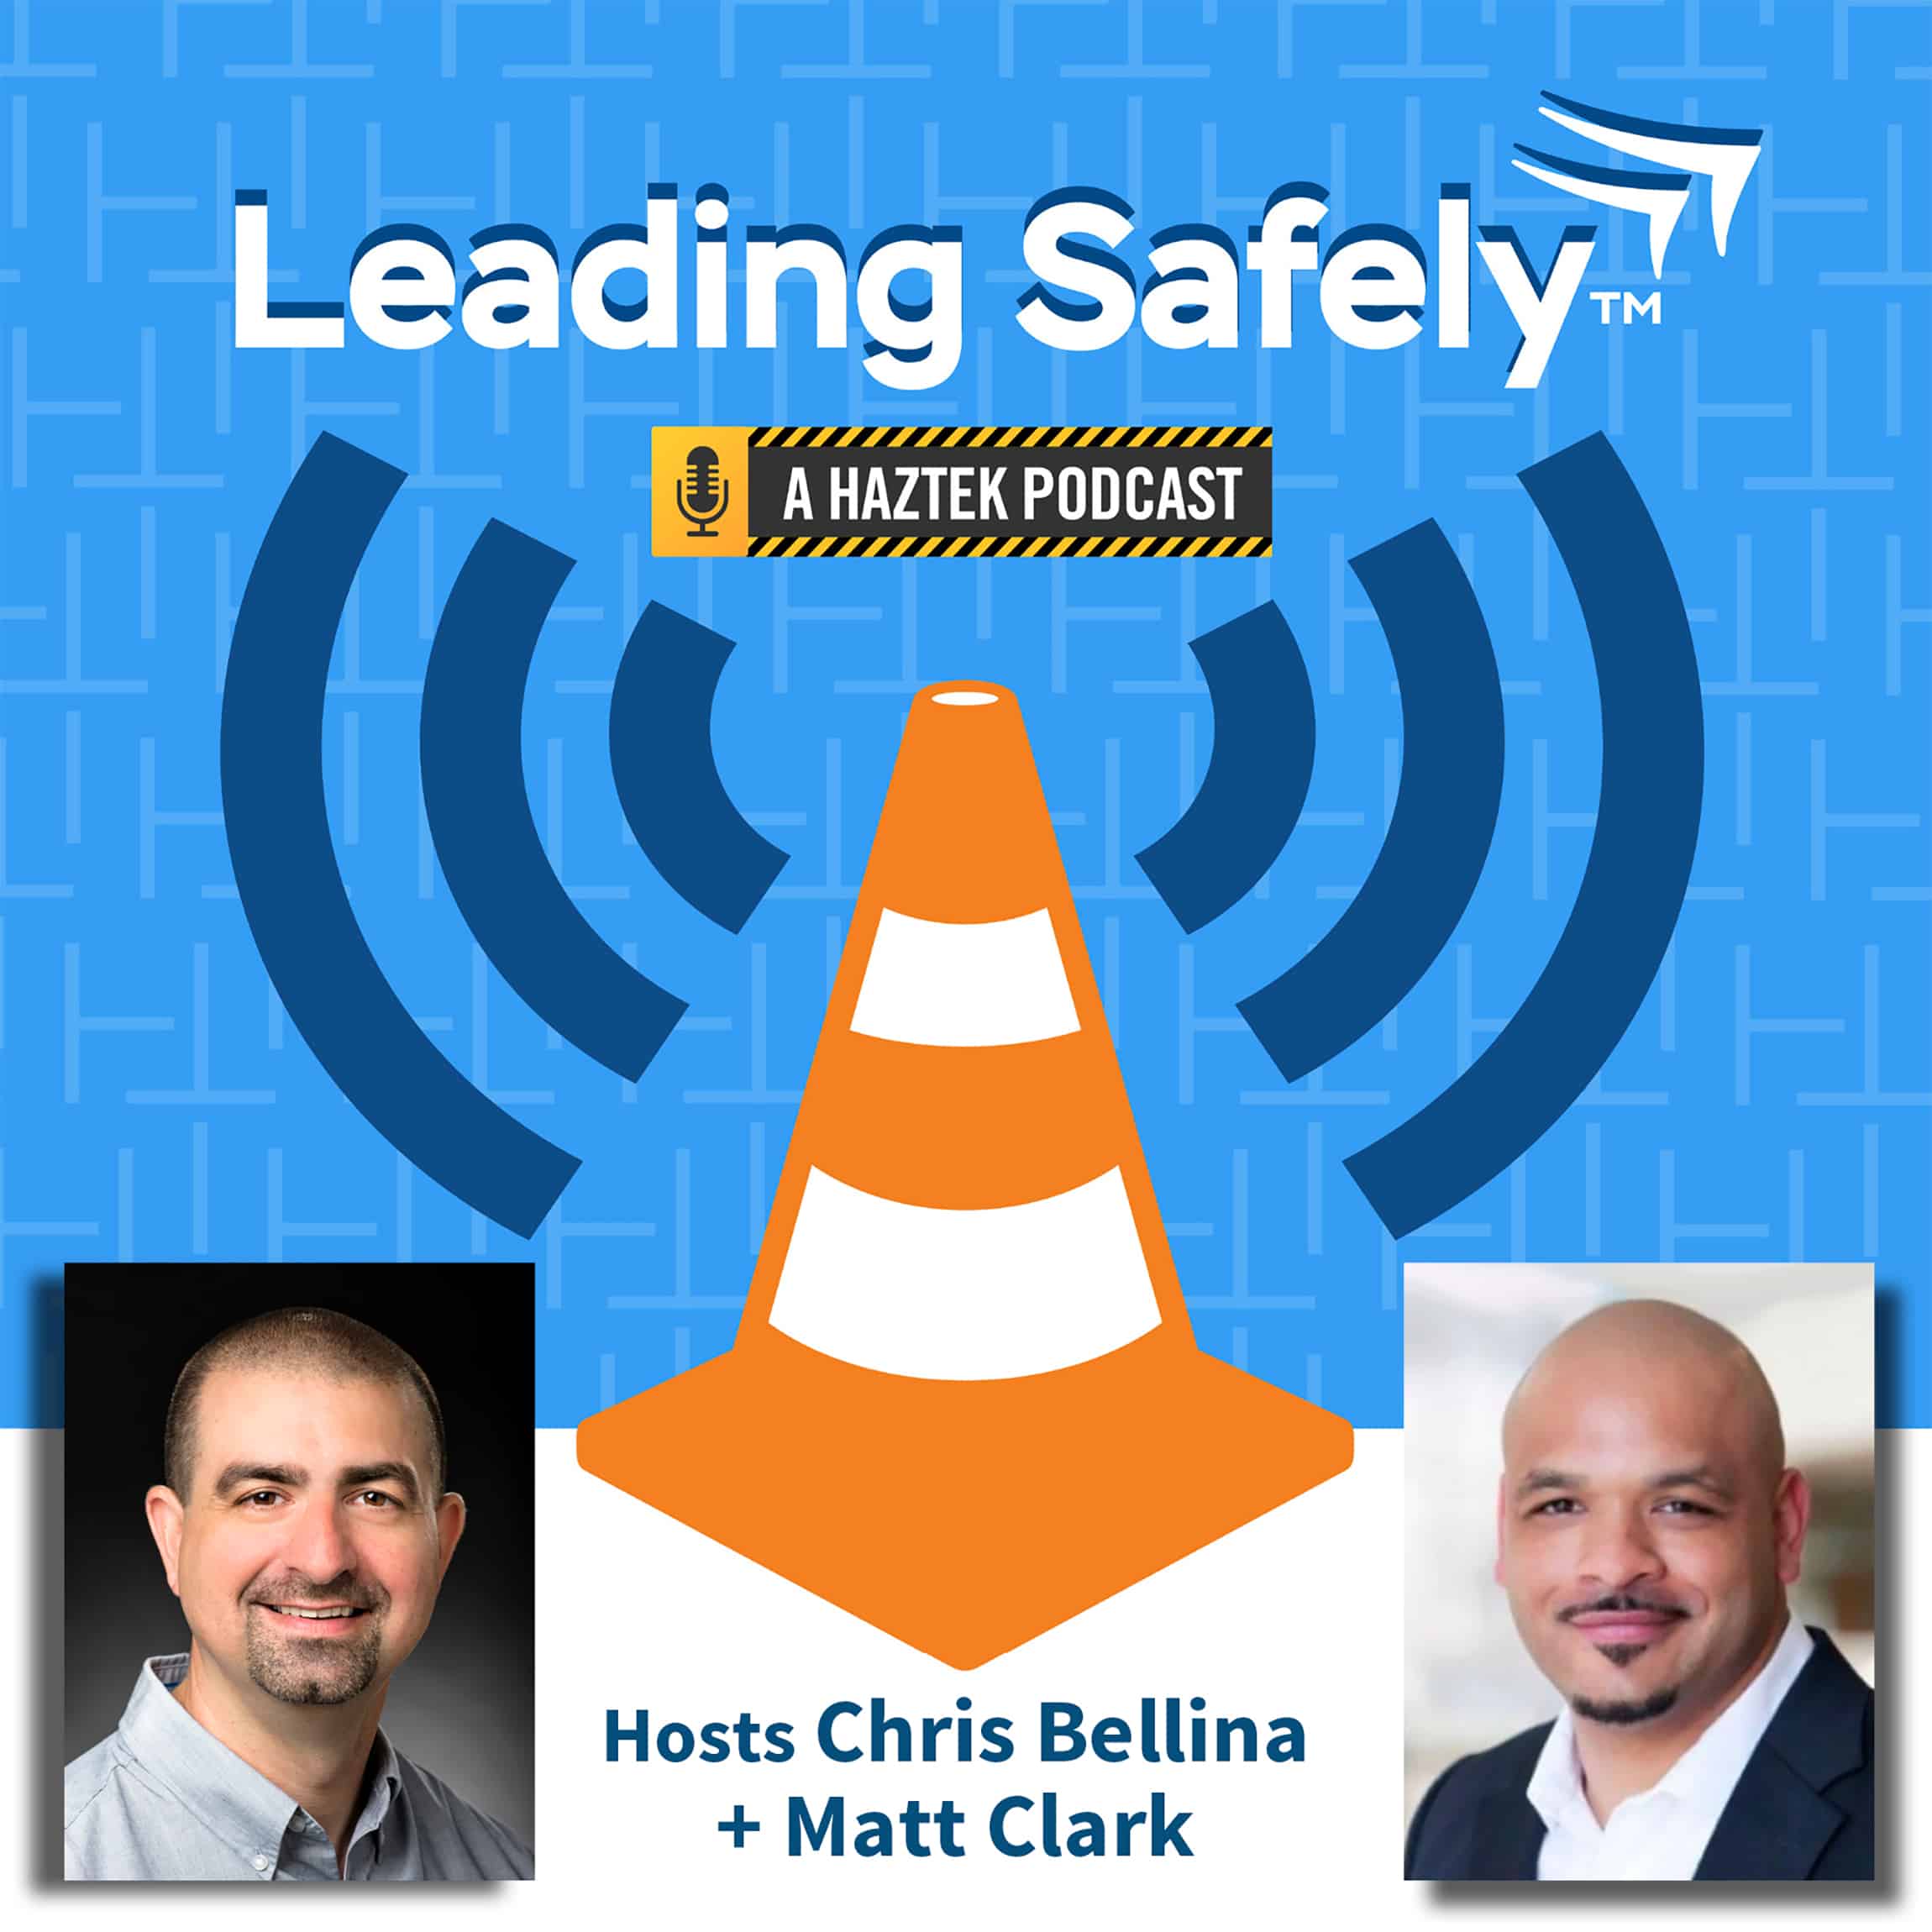 Safety consulting company podcast banner featuring hosts Chris Bellina and Matt Clark.